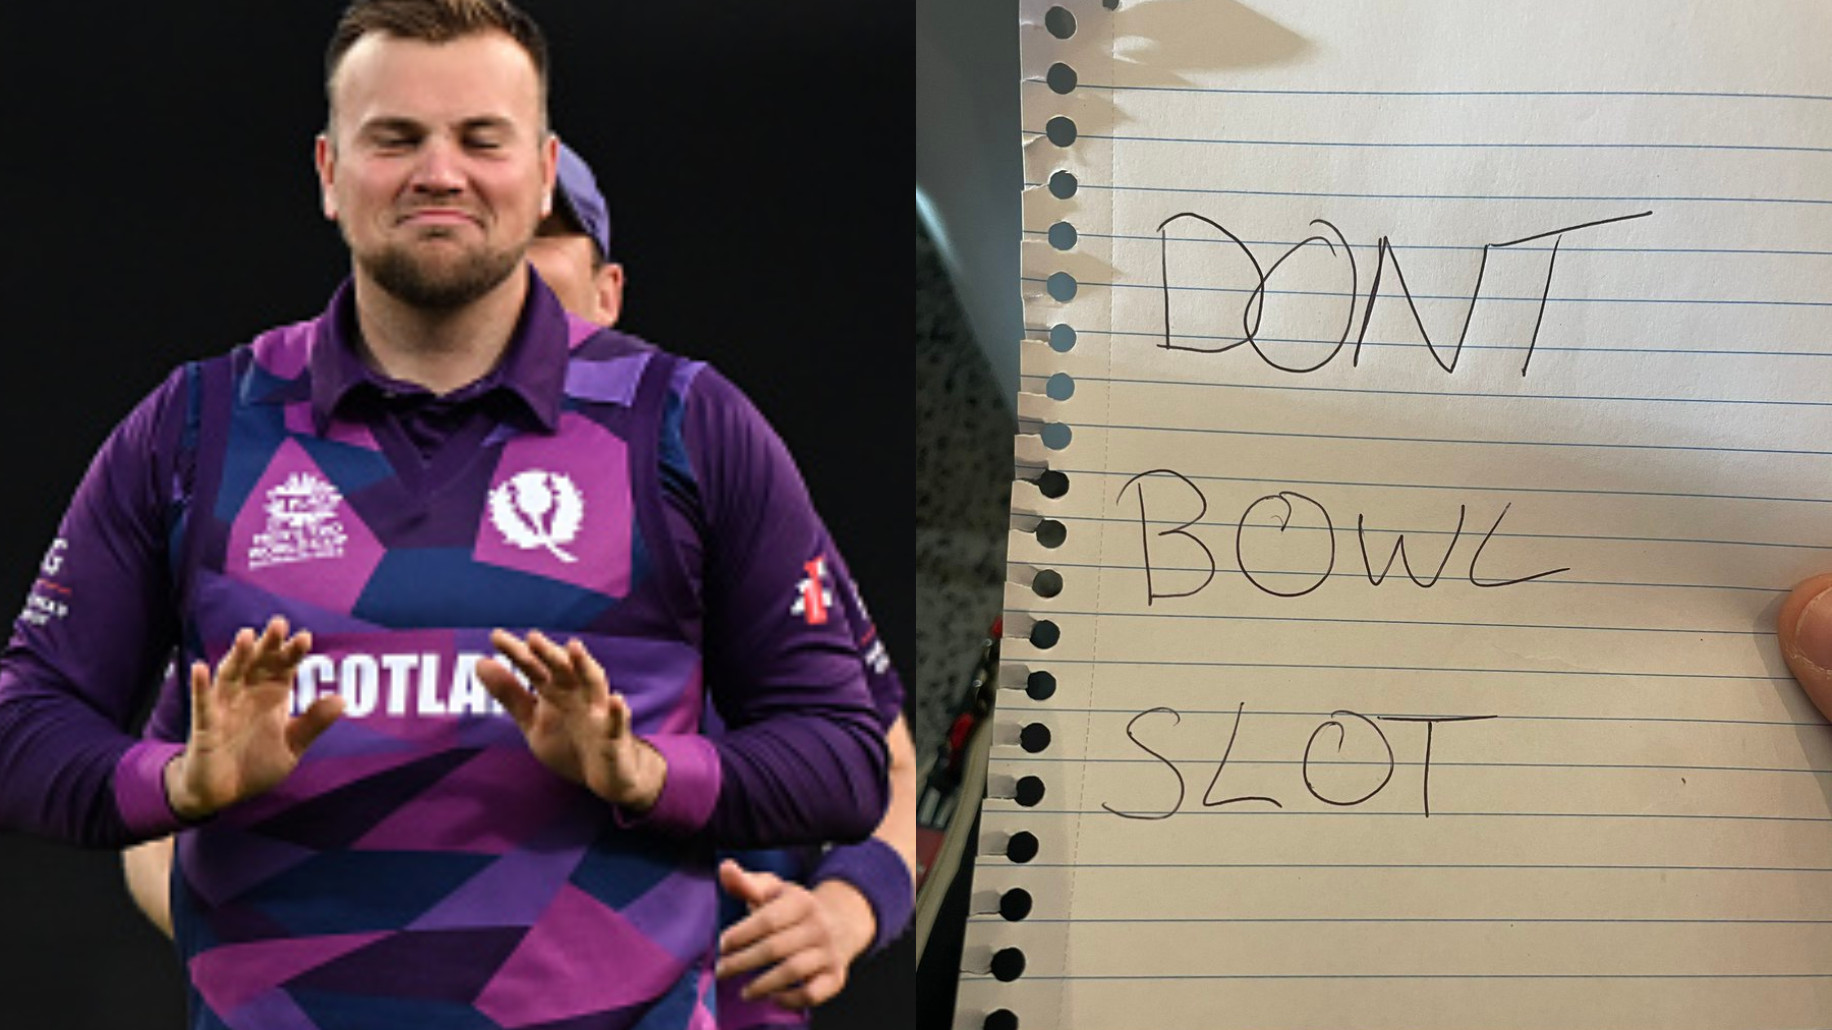 T20 World Cup 2022: ‘Don’t bowl slot’- Scotland’s Mark Watt’s note to himself goes viral after their win over West Indies